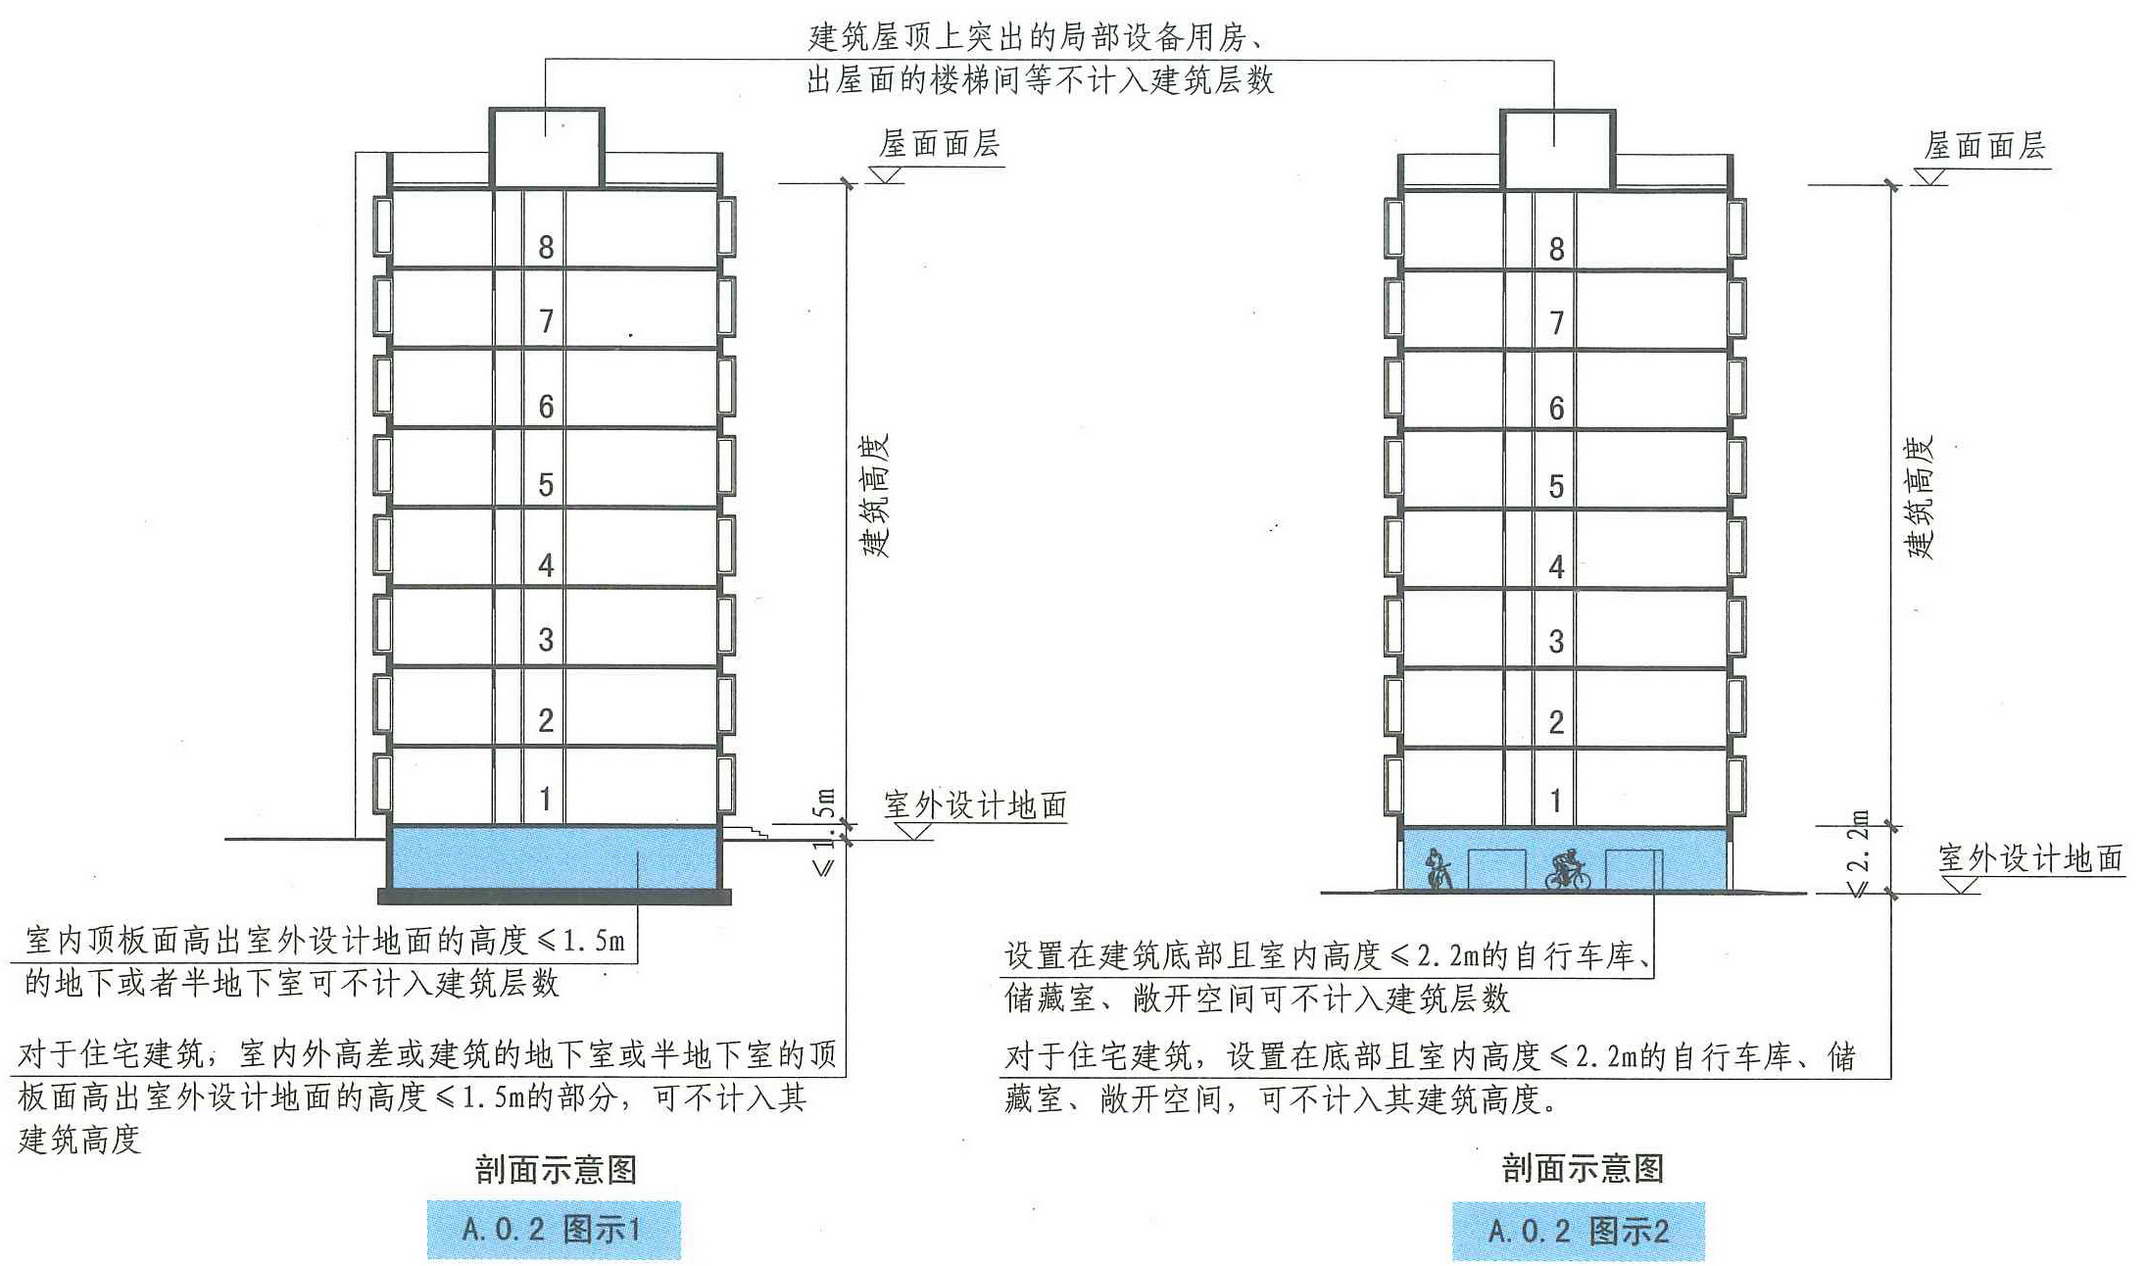 A.0.2图示1A.0.2图示2